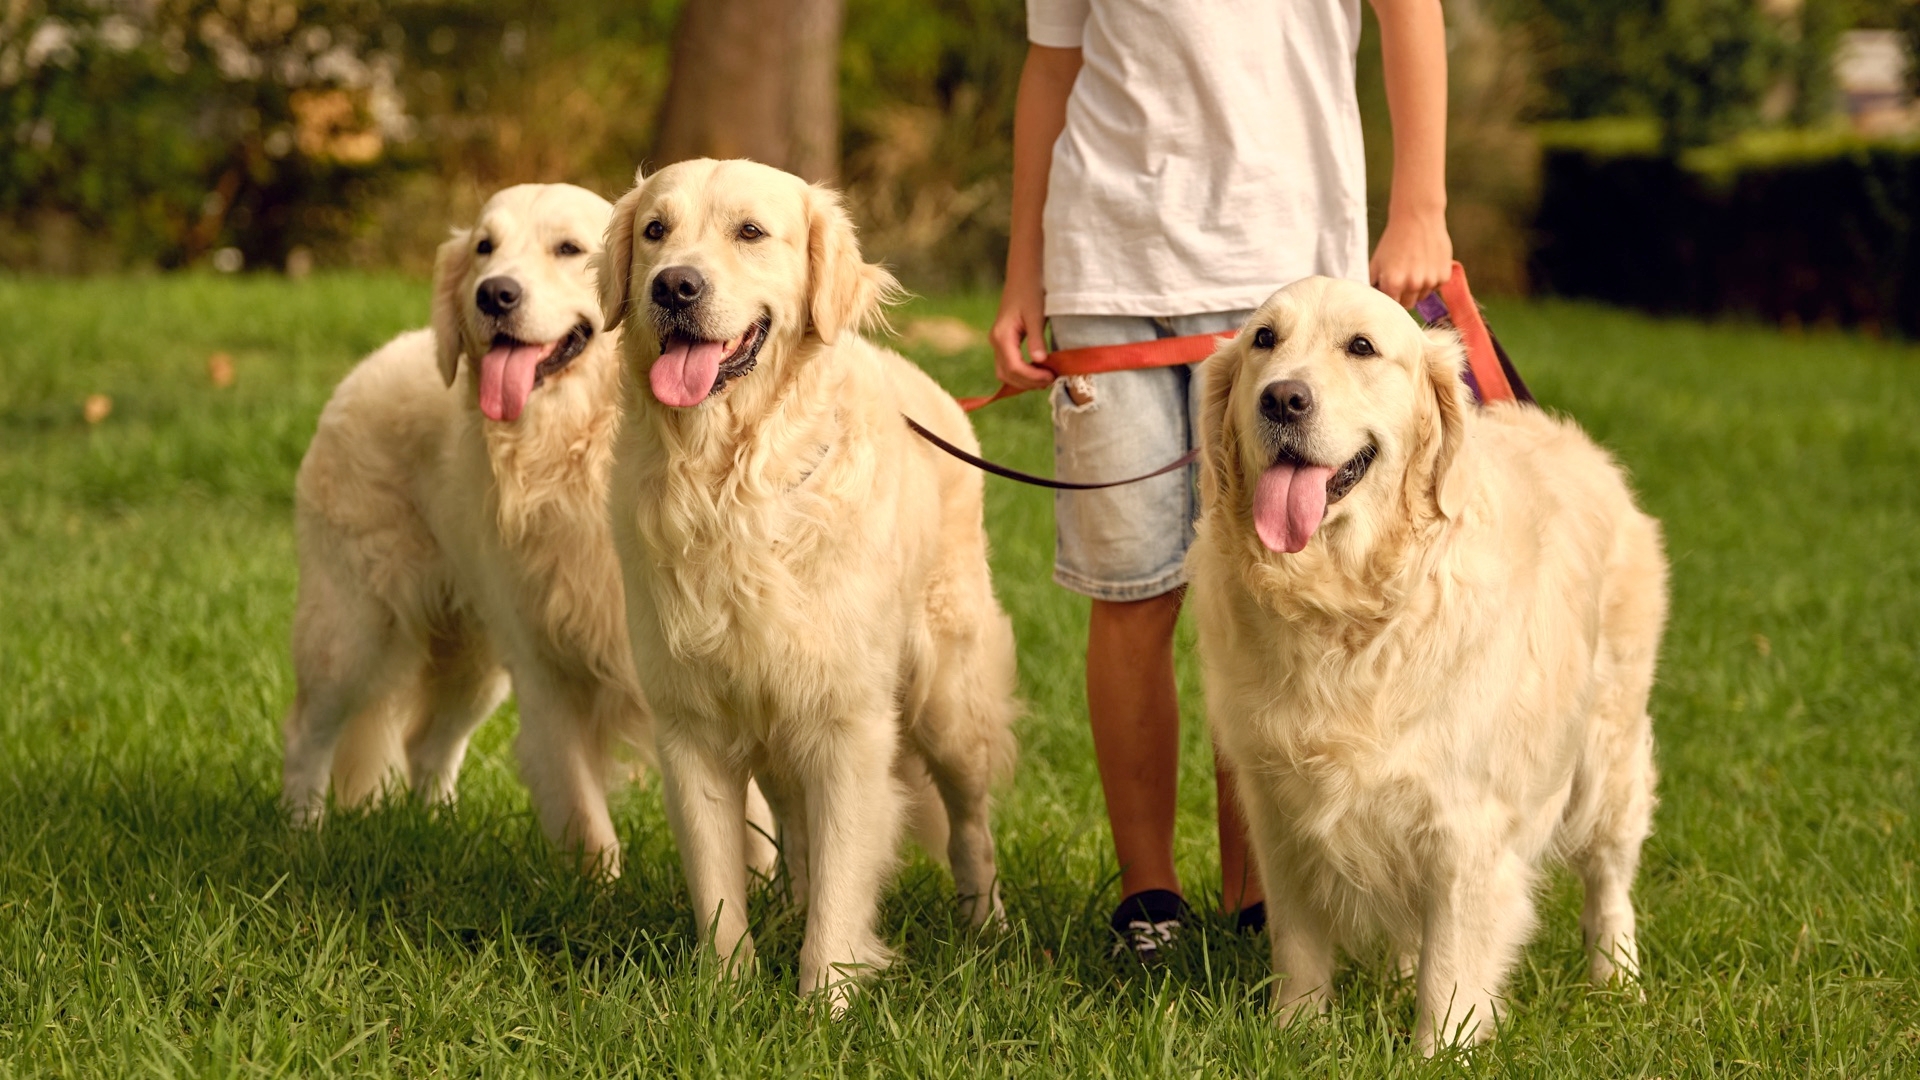 Leash Training Your Dog, An Overview